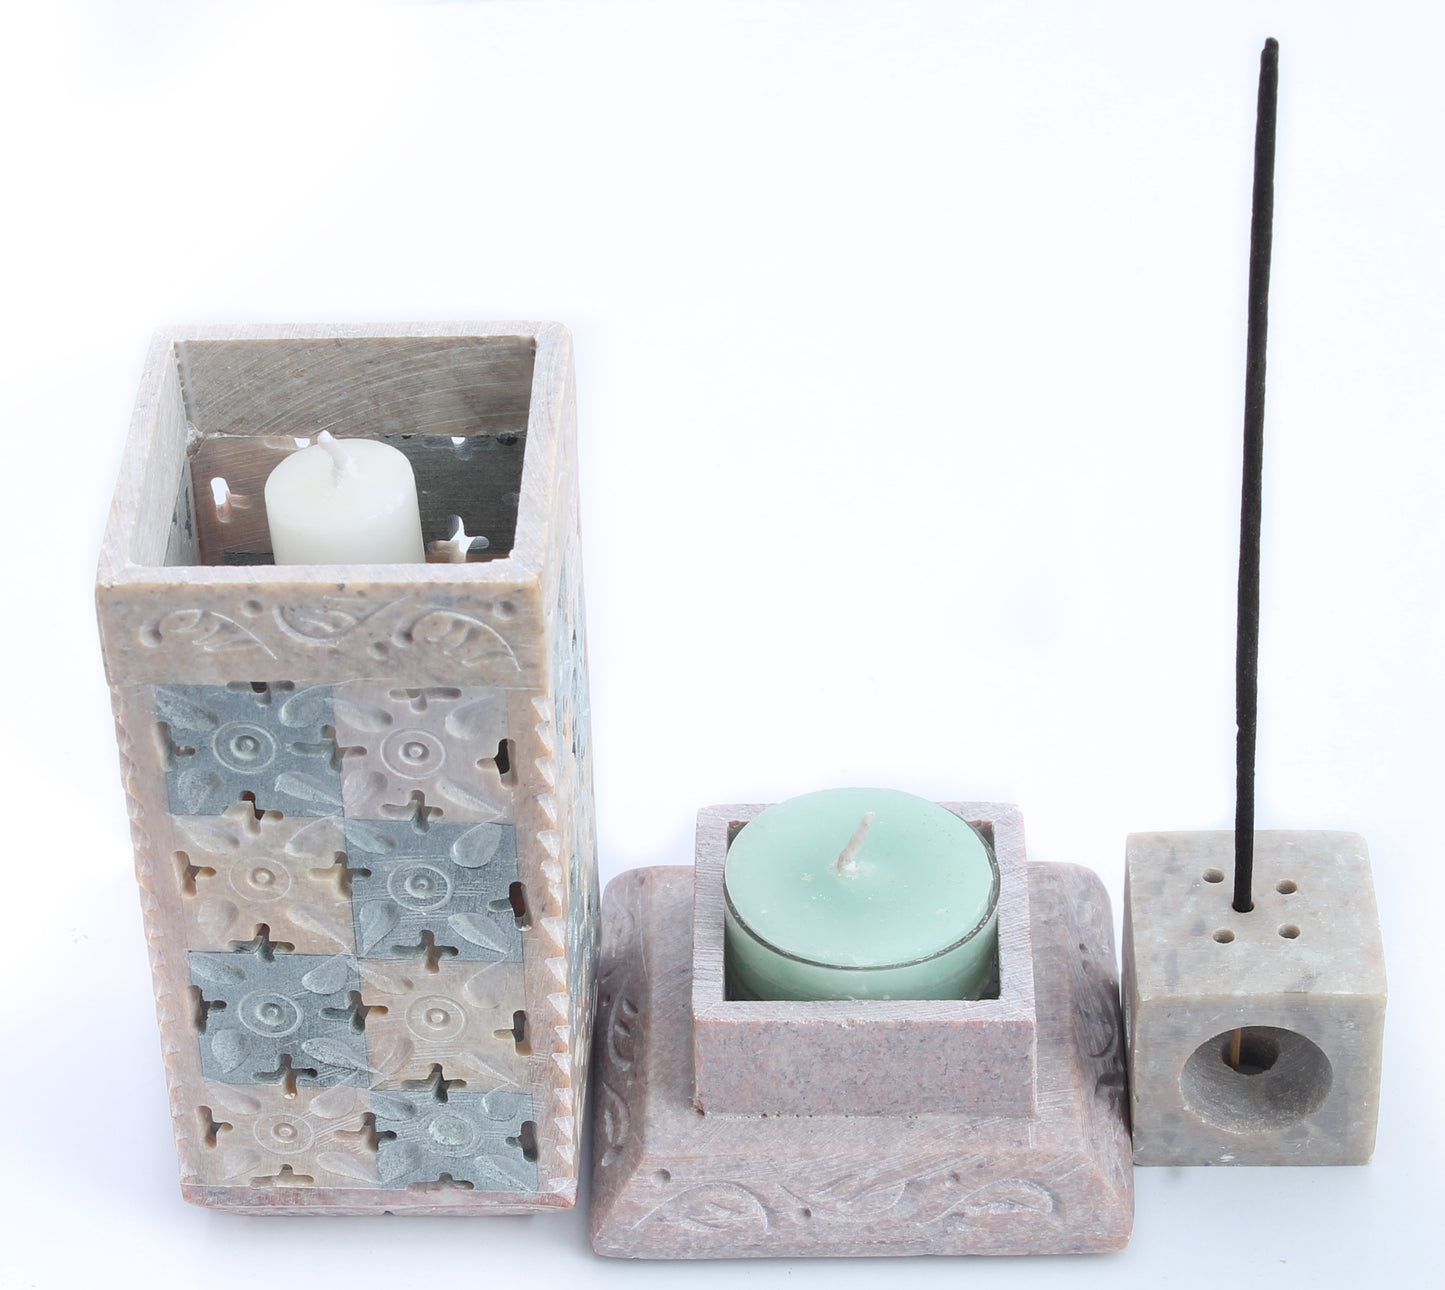 SAVON Stone Incense Stick Holder Palo Santo Holder with Cover 3 Parts tealight Stand Aromatherapy Plastic Free